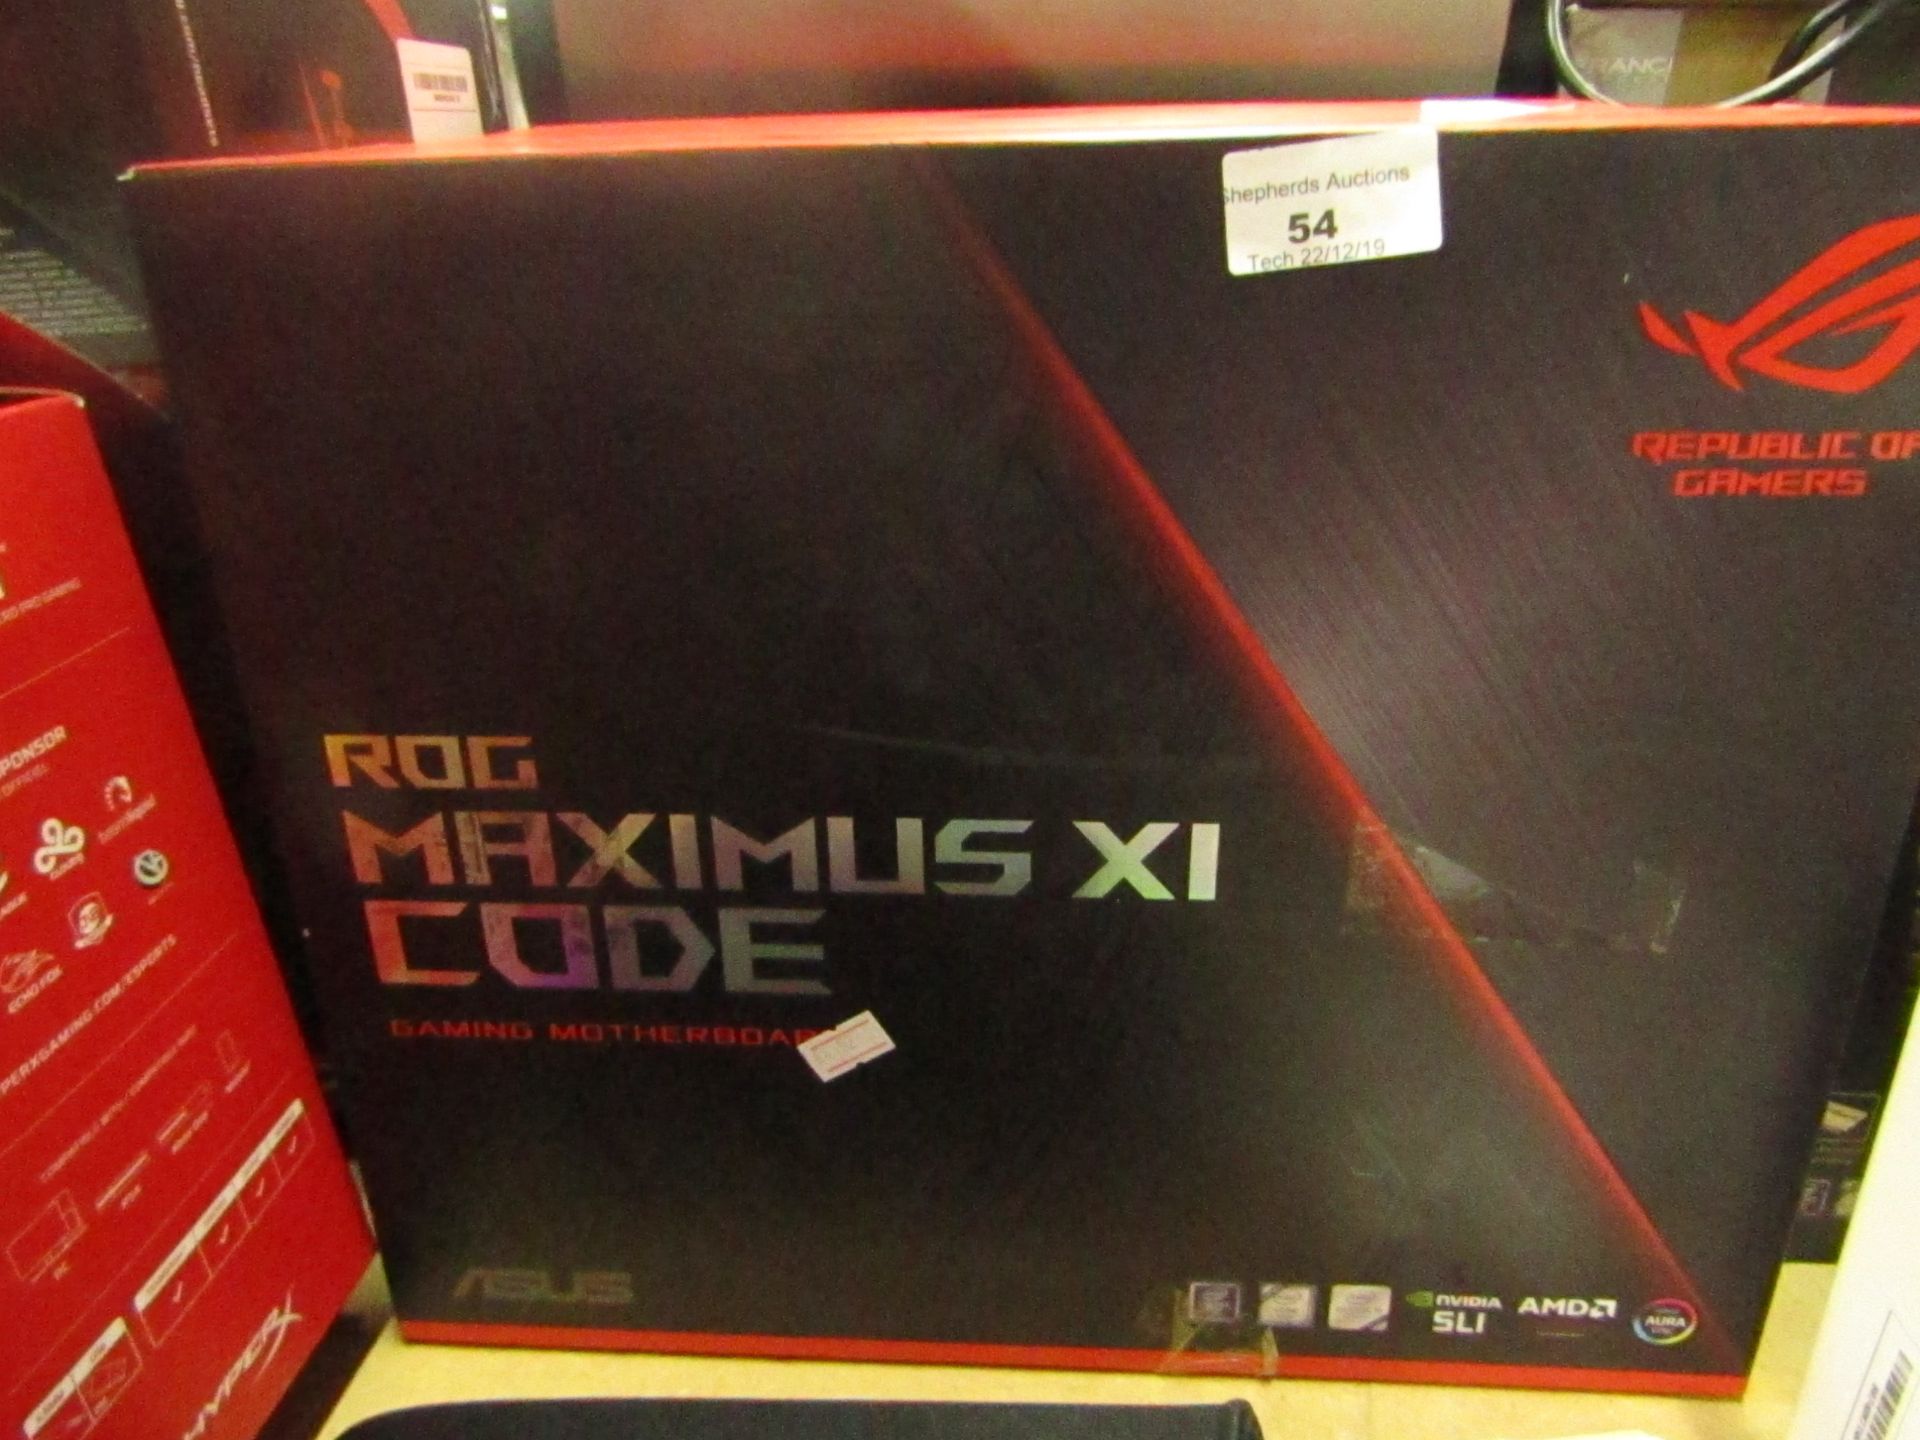 MSI Maximus XI Code gaming motherboard, untested and boxed. RRP £335.00